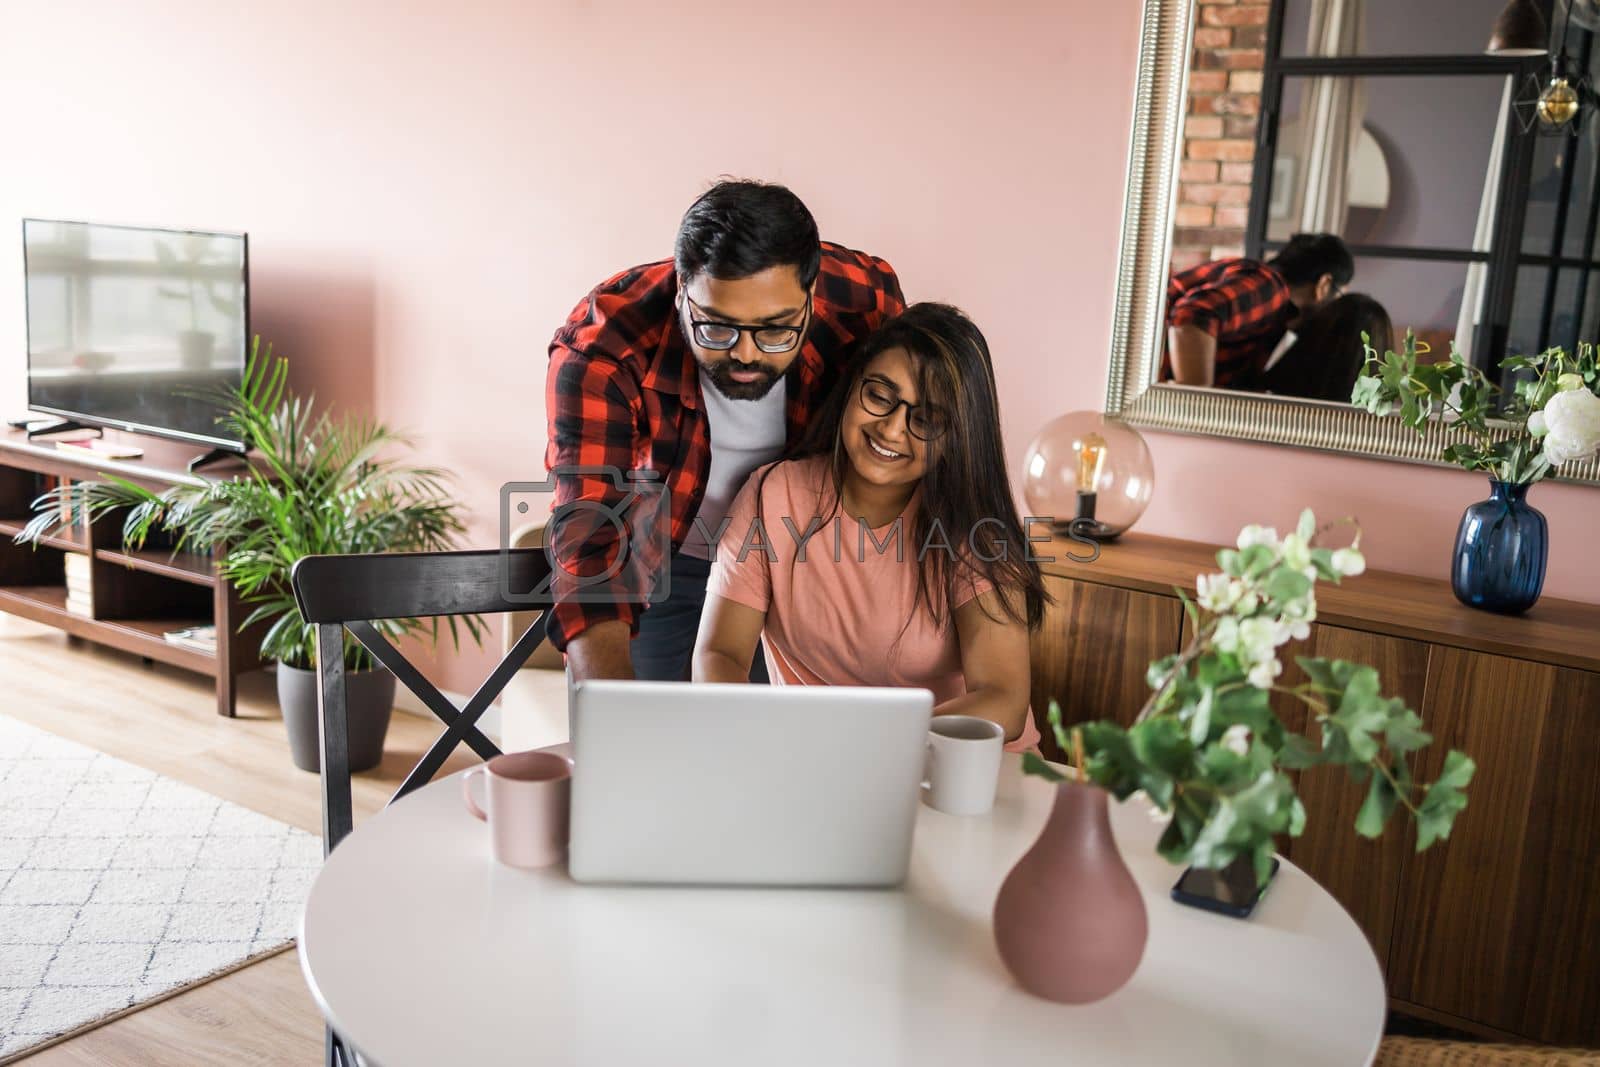 Royalty free image of technology remote job and lifestyle concept - happy indian man and woman in glasses with laptop computer working at home office by Satura86